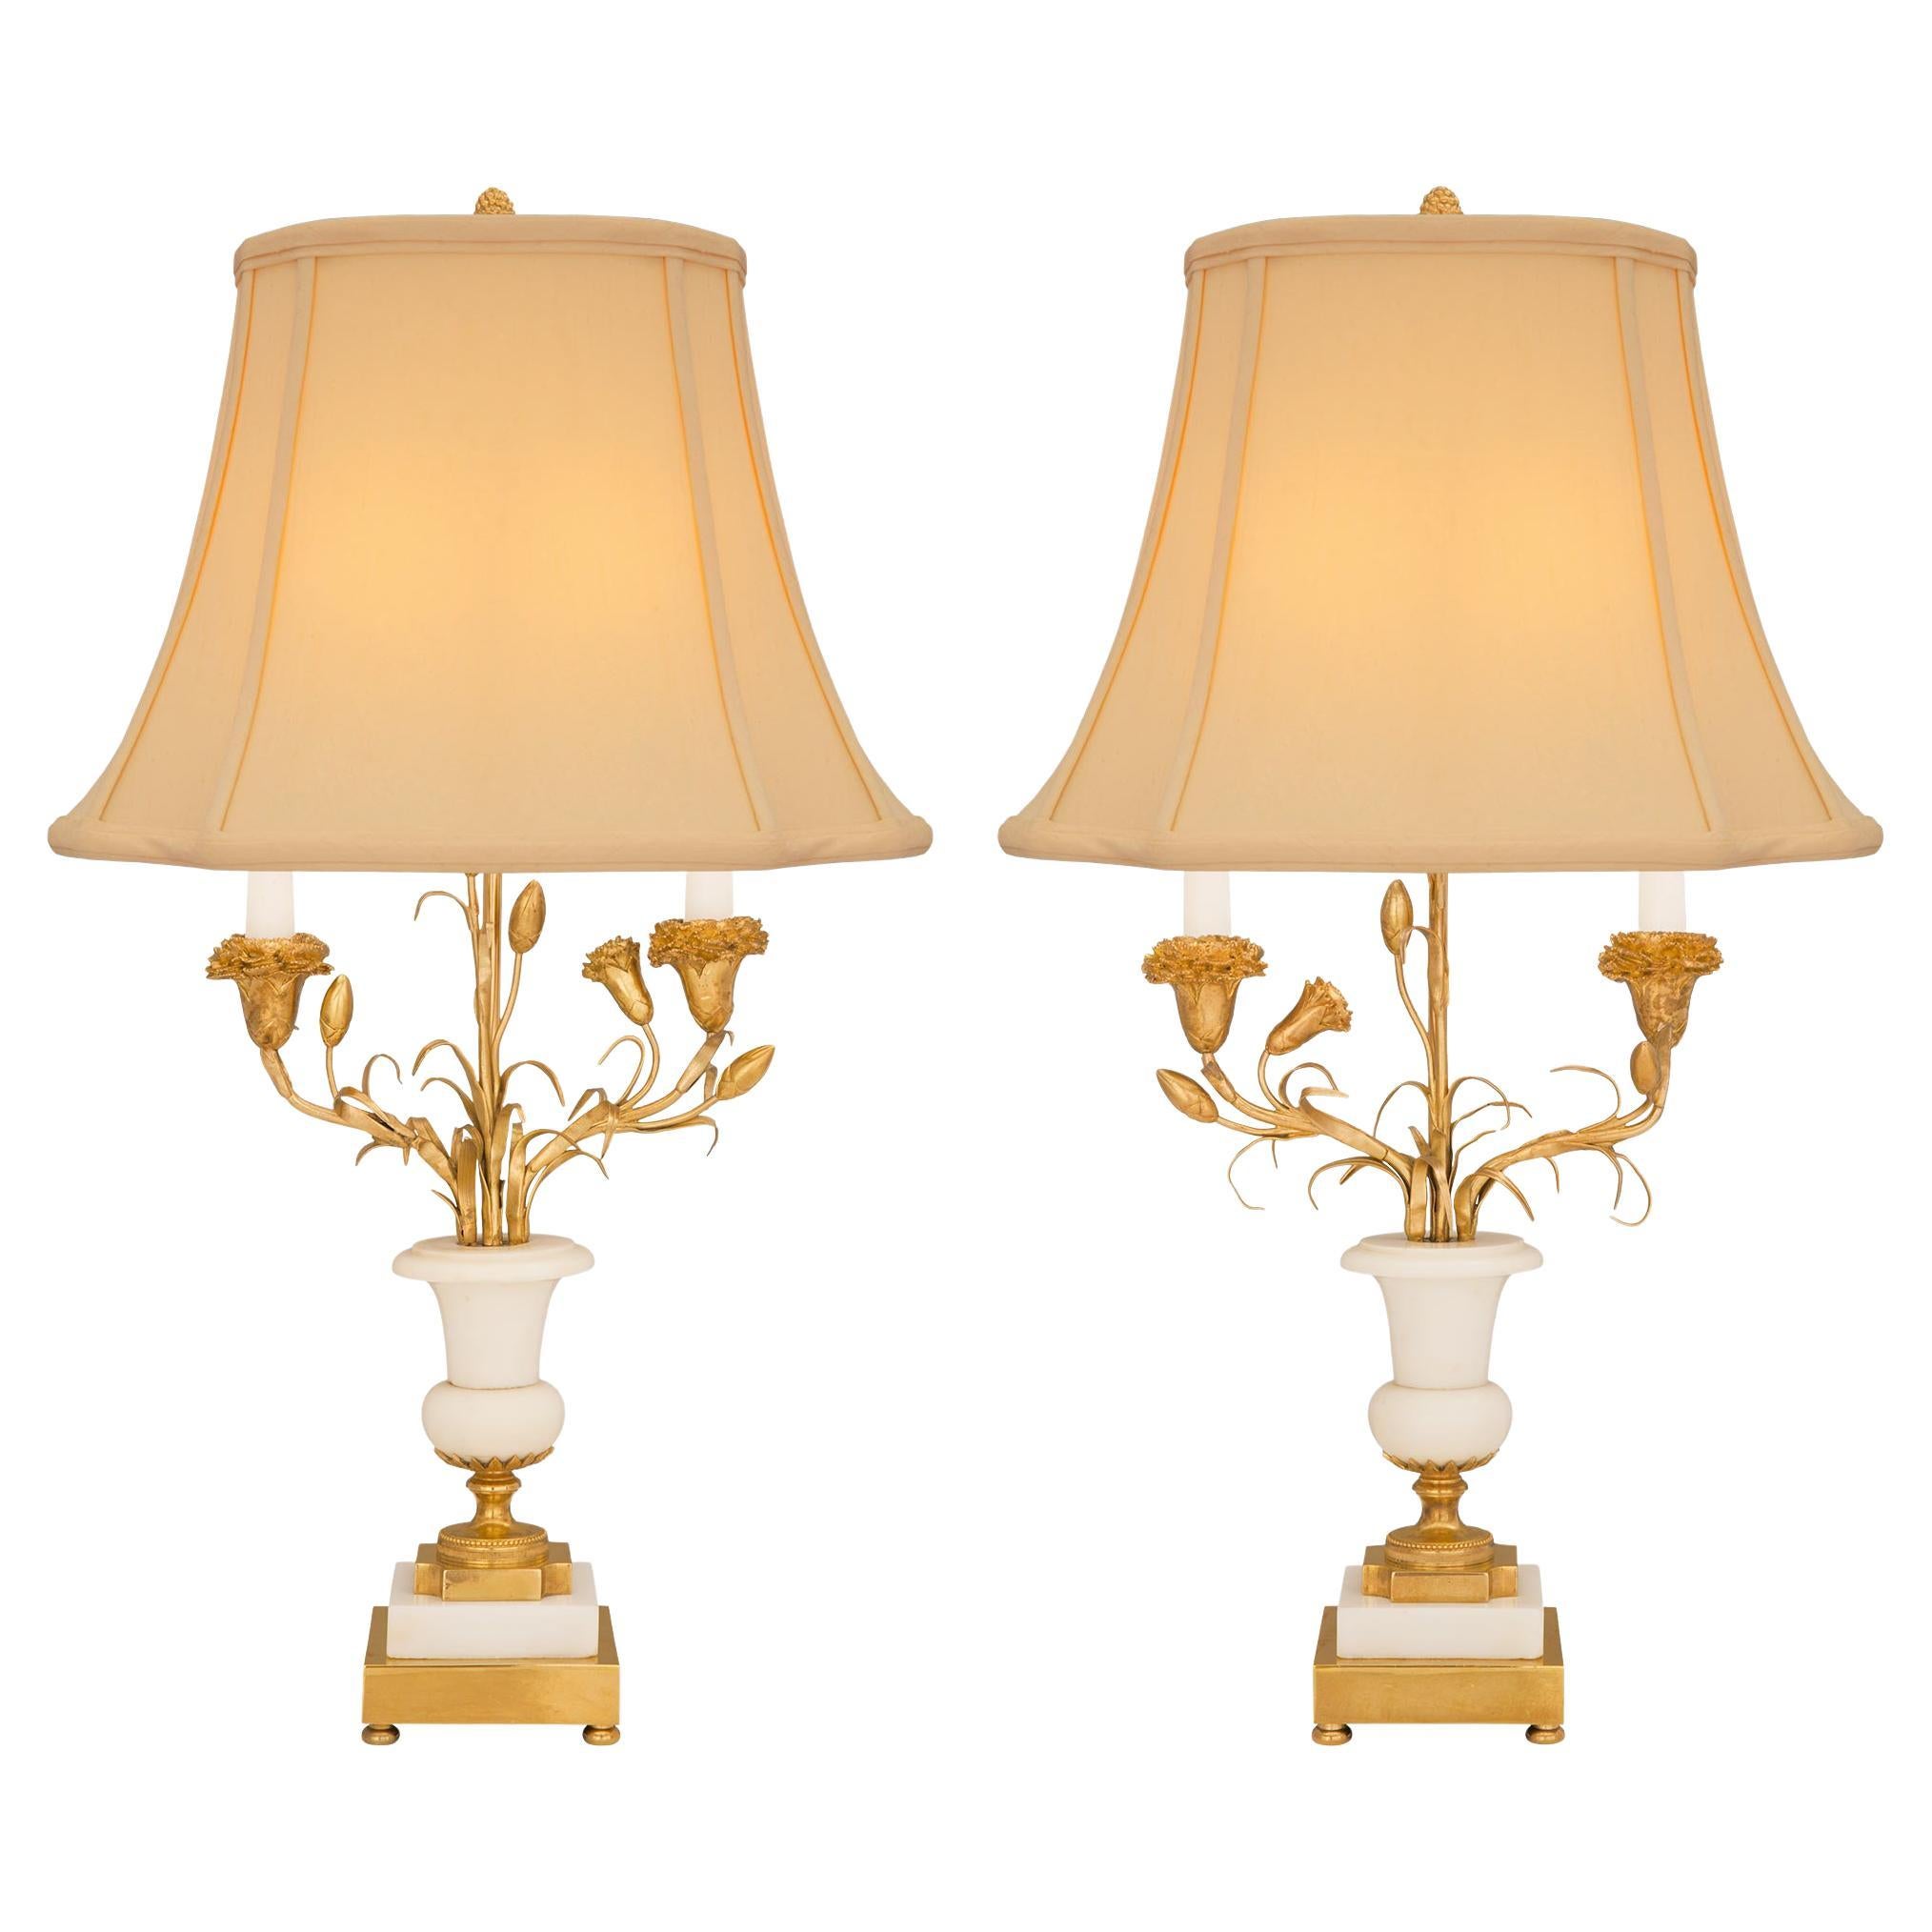 Pair of French Late 19th Century Louis XVI Style Candelabras Mounted into Lamps